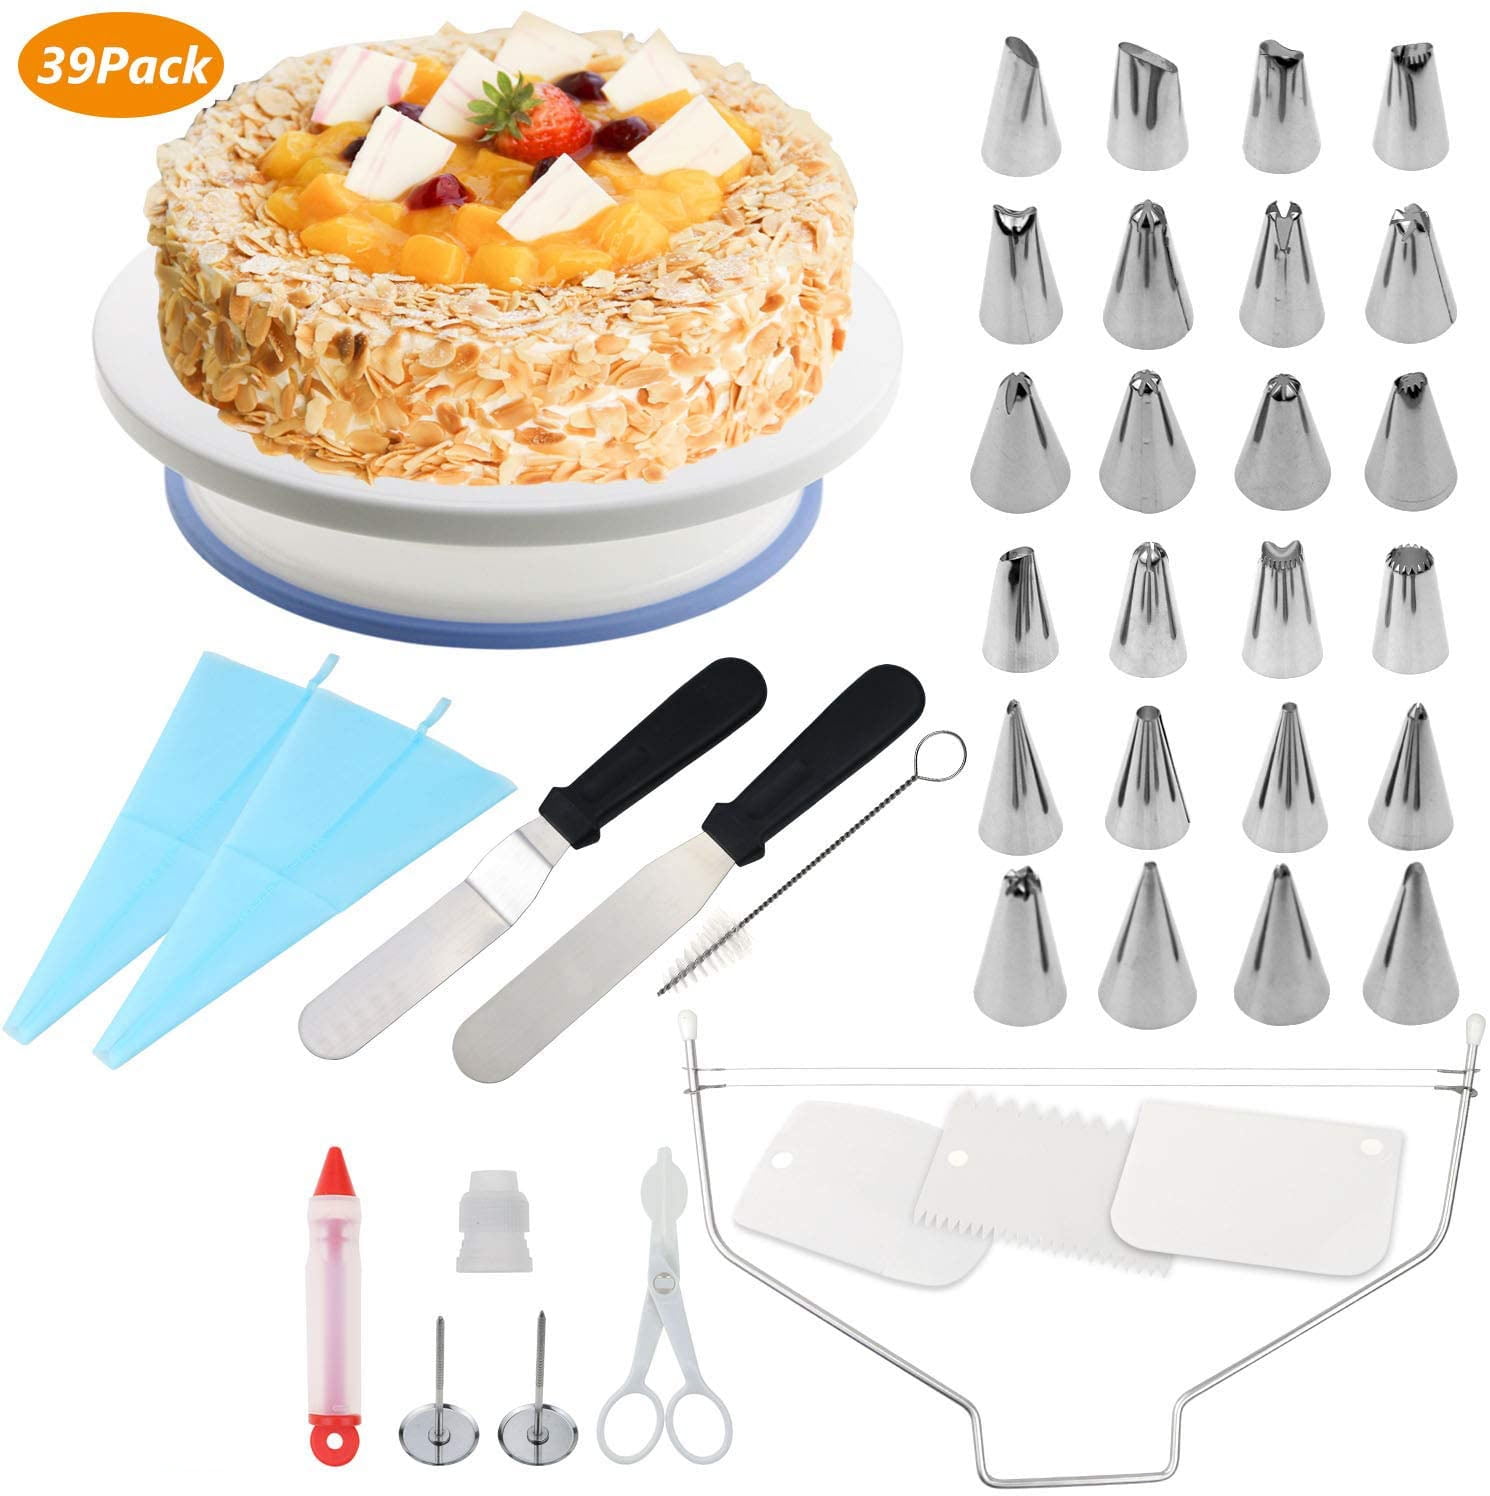 Dropship Rotating Platform Cake Stand Round Cake Turntable Stand DIY  Kitchen Baking Tool Cake Icing Decorating Tool to Sell Online at a Lower  Price